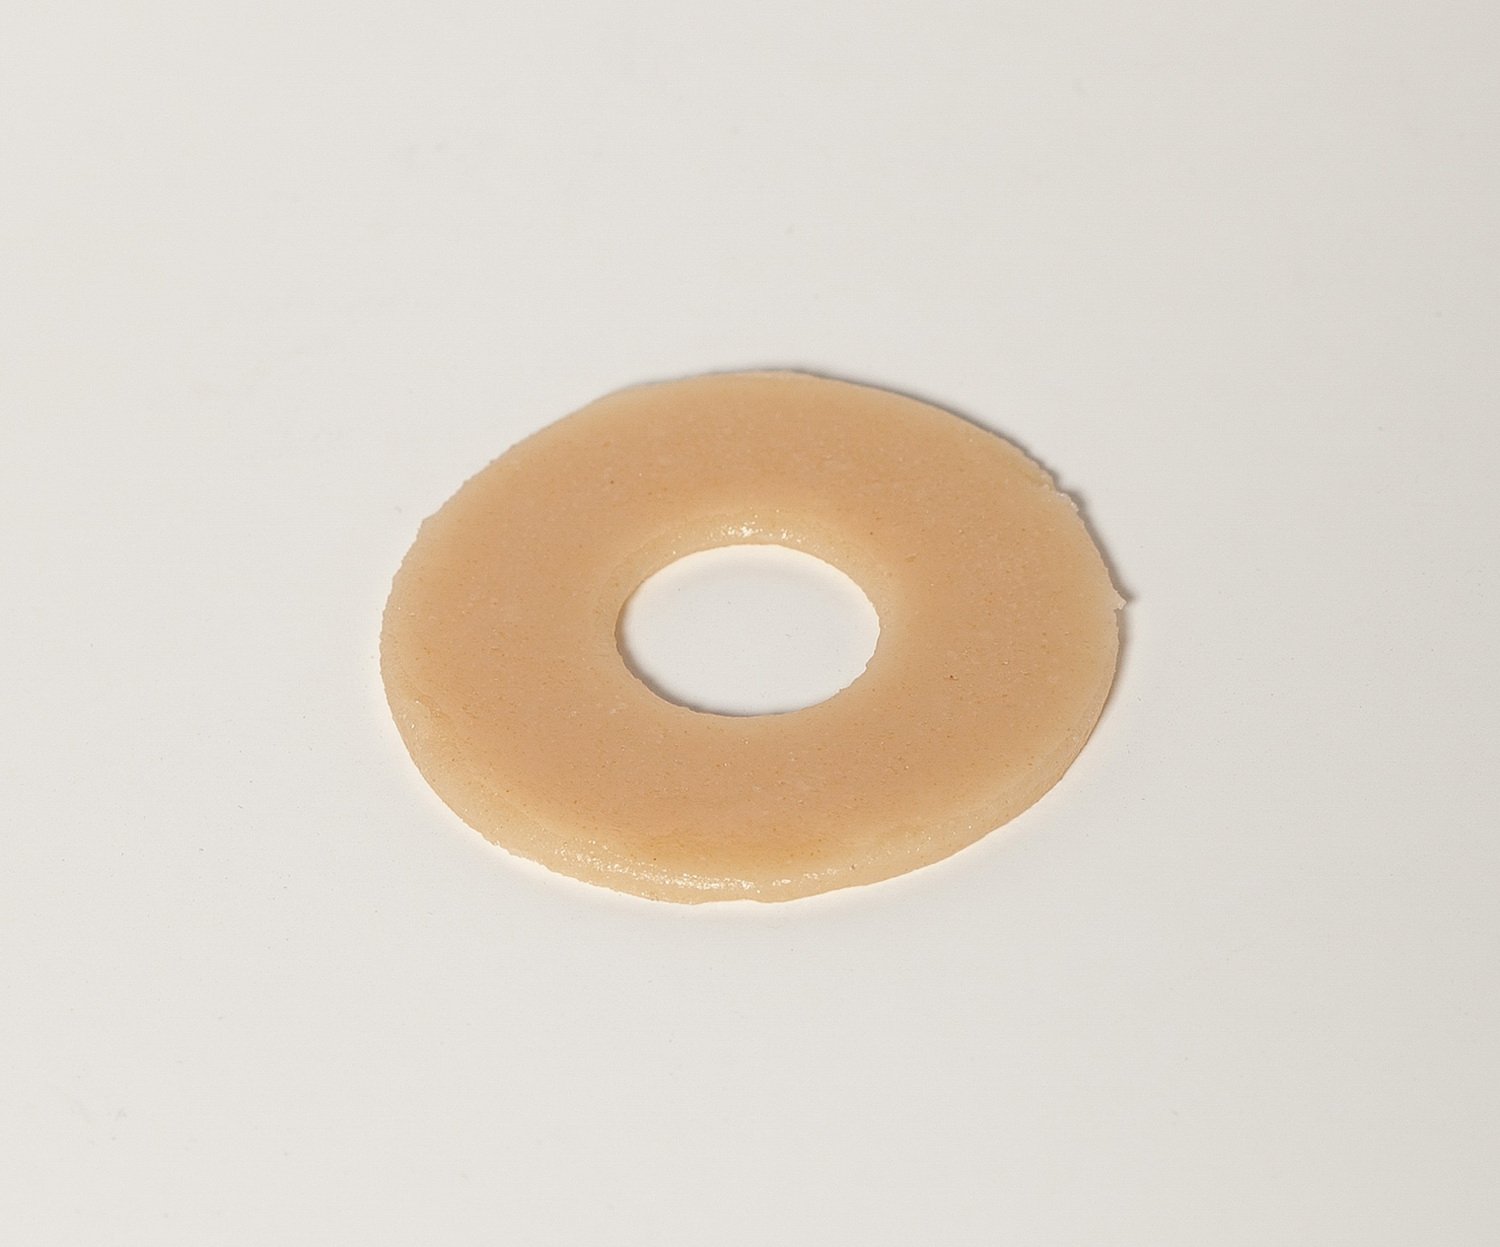 Skin Barrier Ring Entrust™ FortaGuard Moldable, Extended Wear Adhesive without Tape Without Flange Universal System 4 Inch Diameter